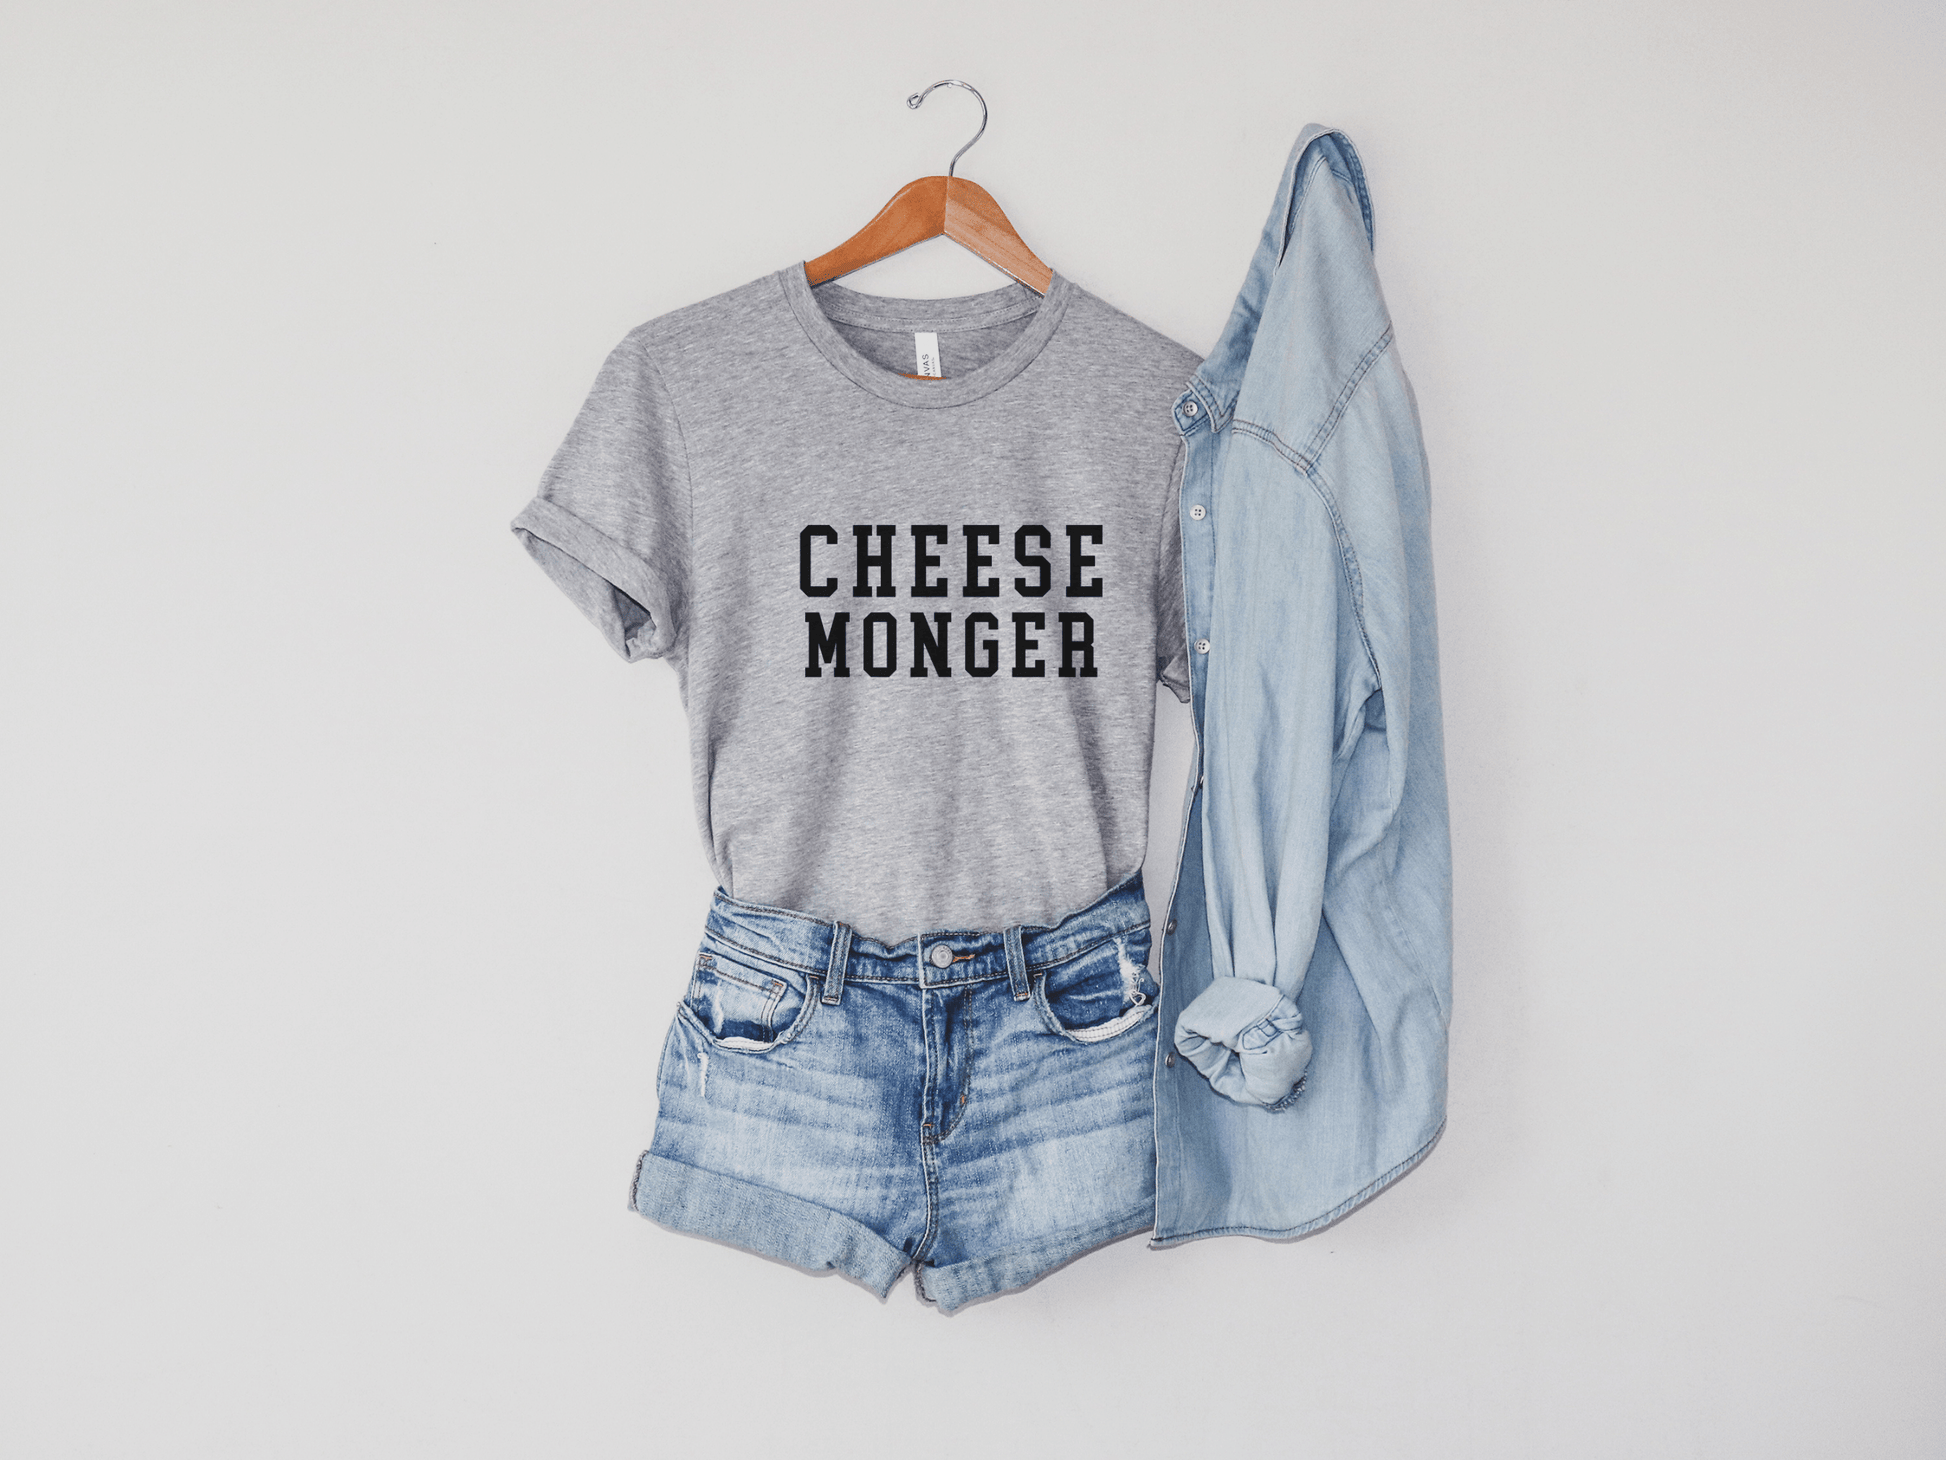 Cheese Monger T-Shirt in Athletic Grey